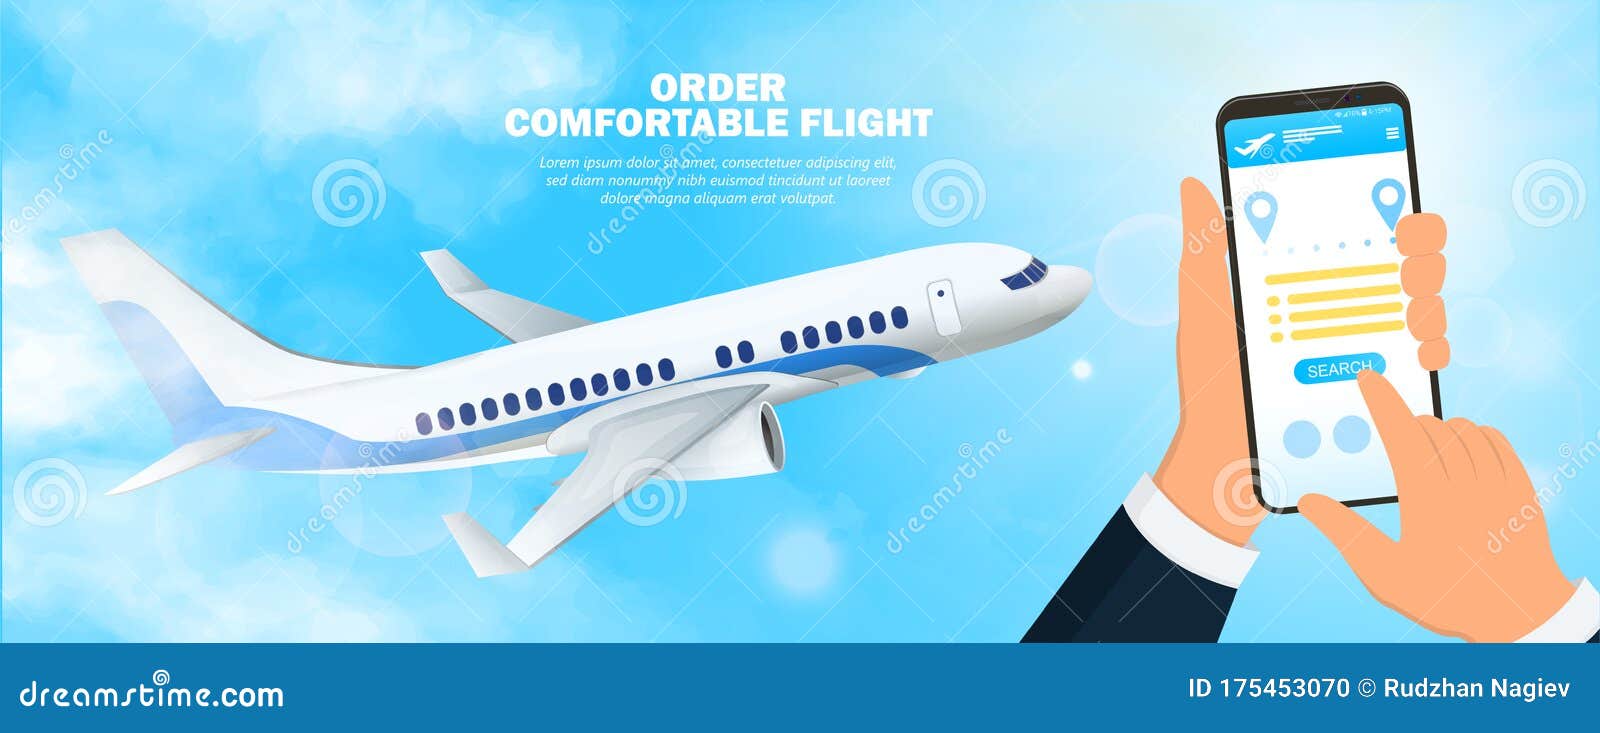 CLT by flight ticket phone order from PNS to